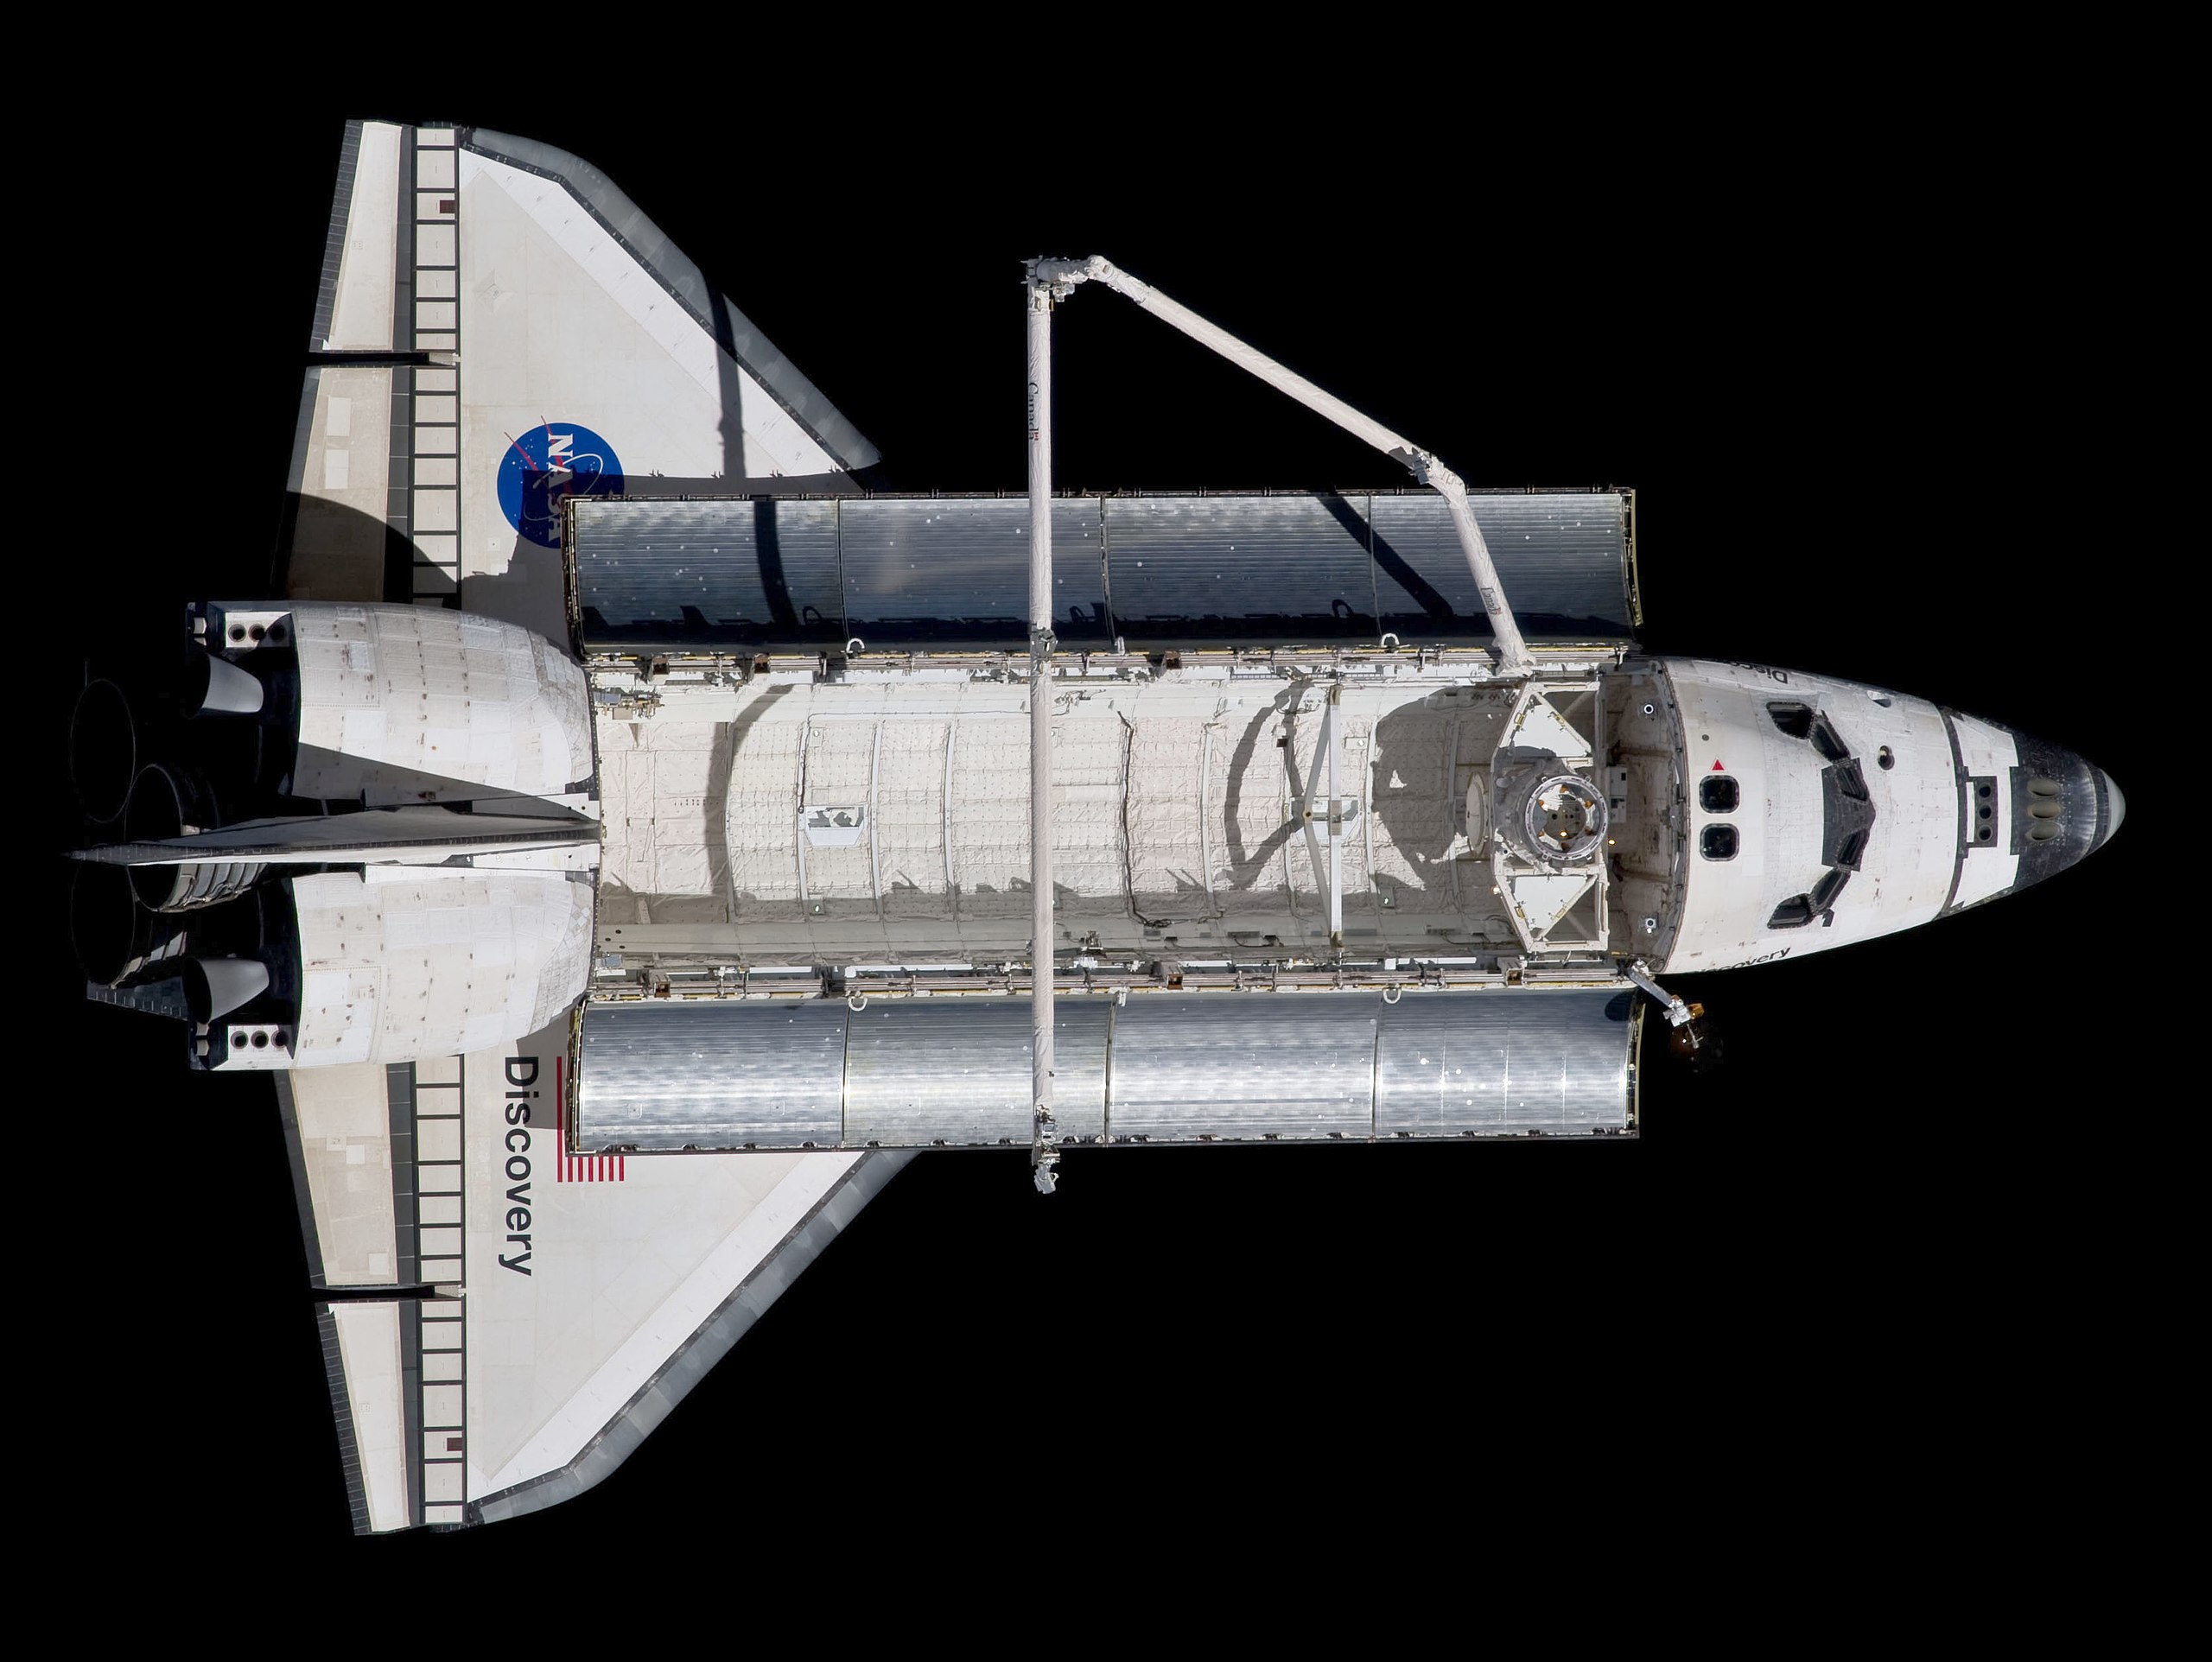 space shuttle discovery<br />
